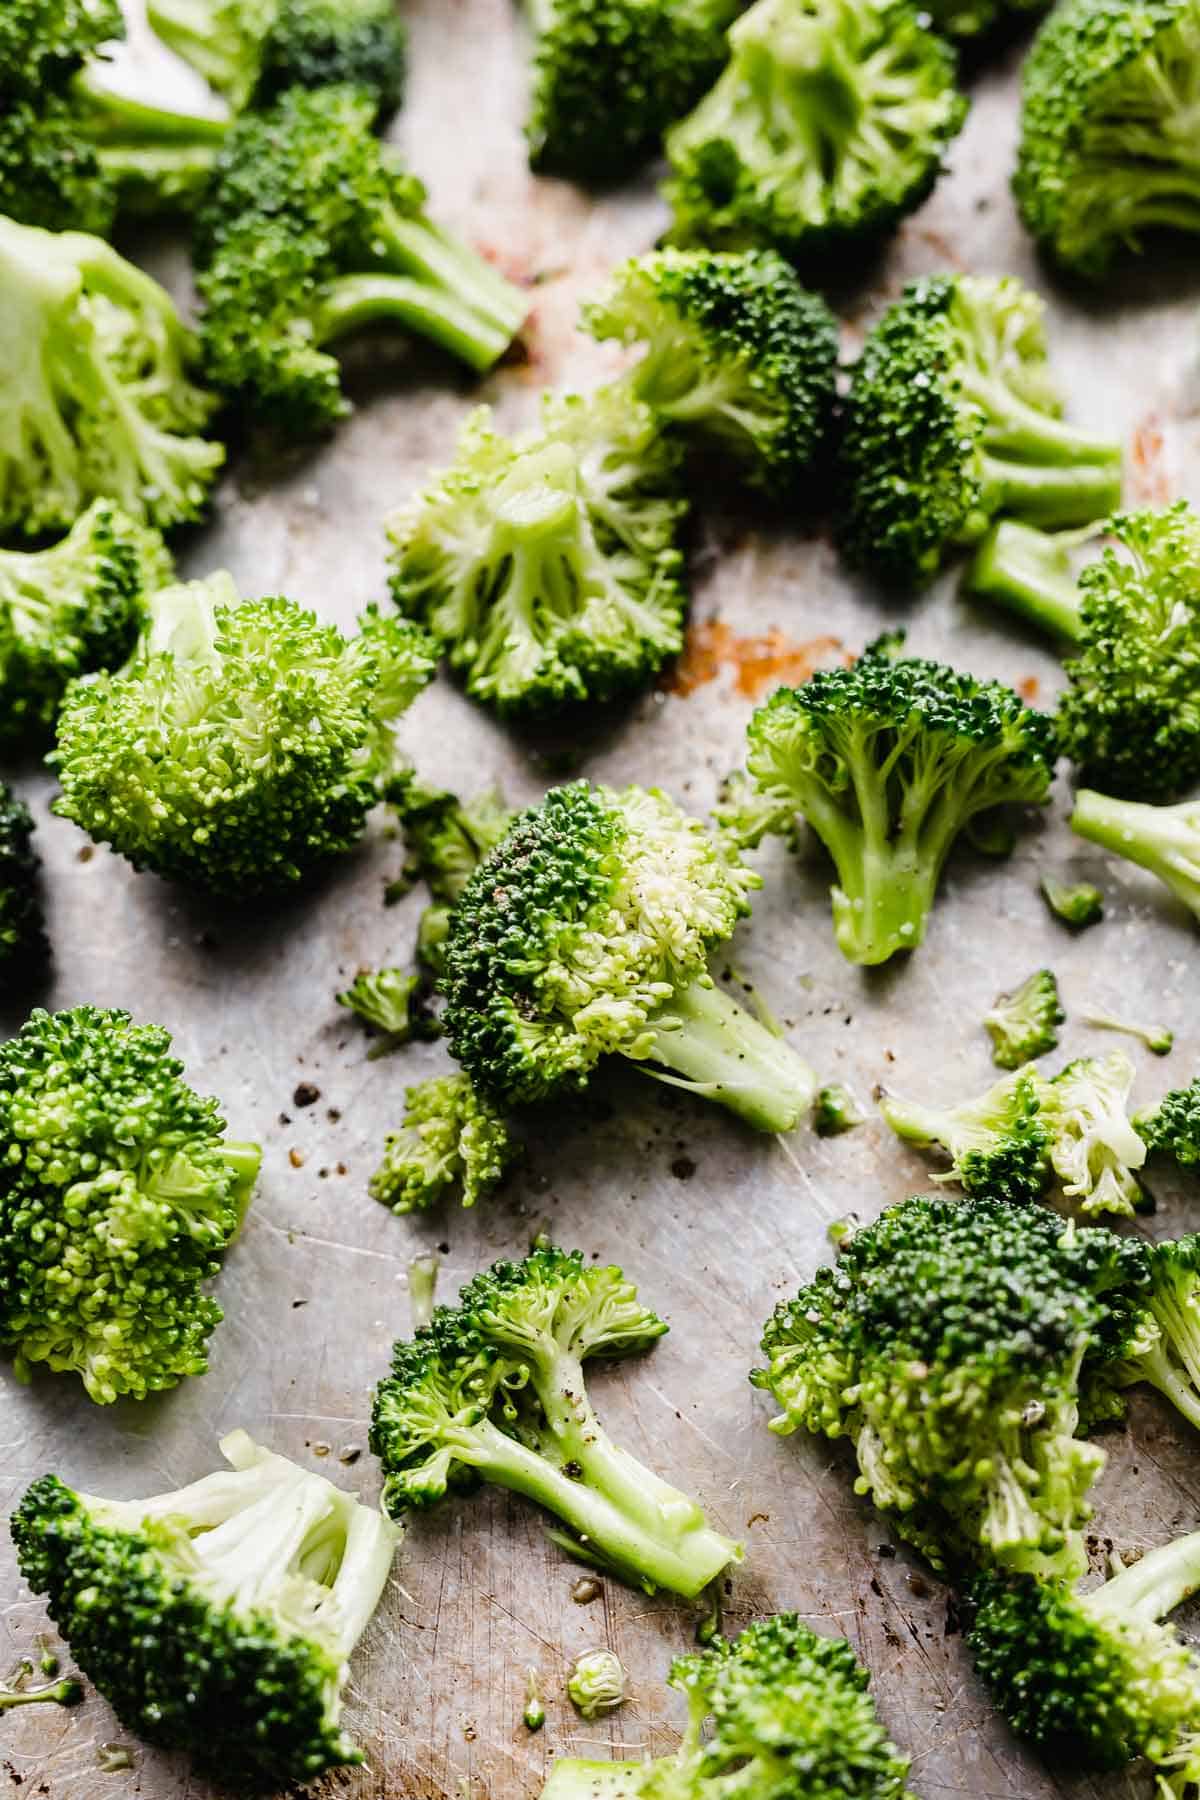 Raw and uncooked broccoli florets on a baking sheet.